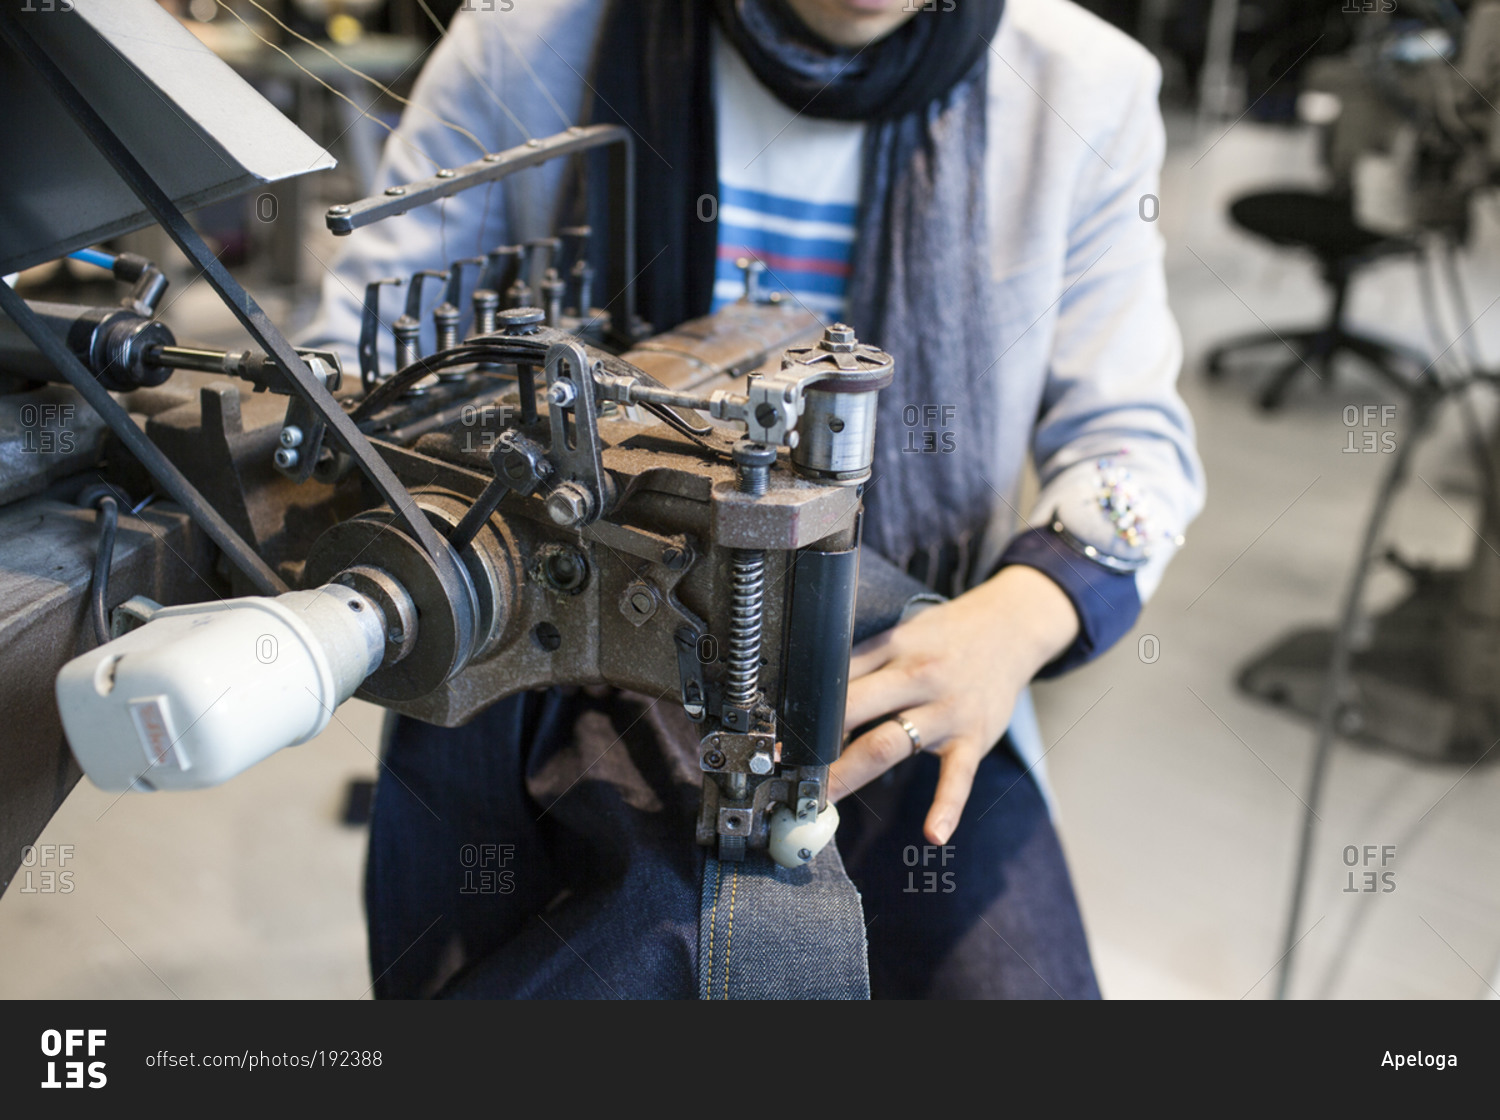 Woman sewing seam with denim at industrial machine